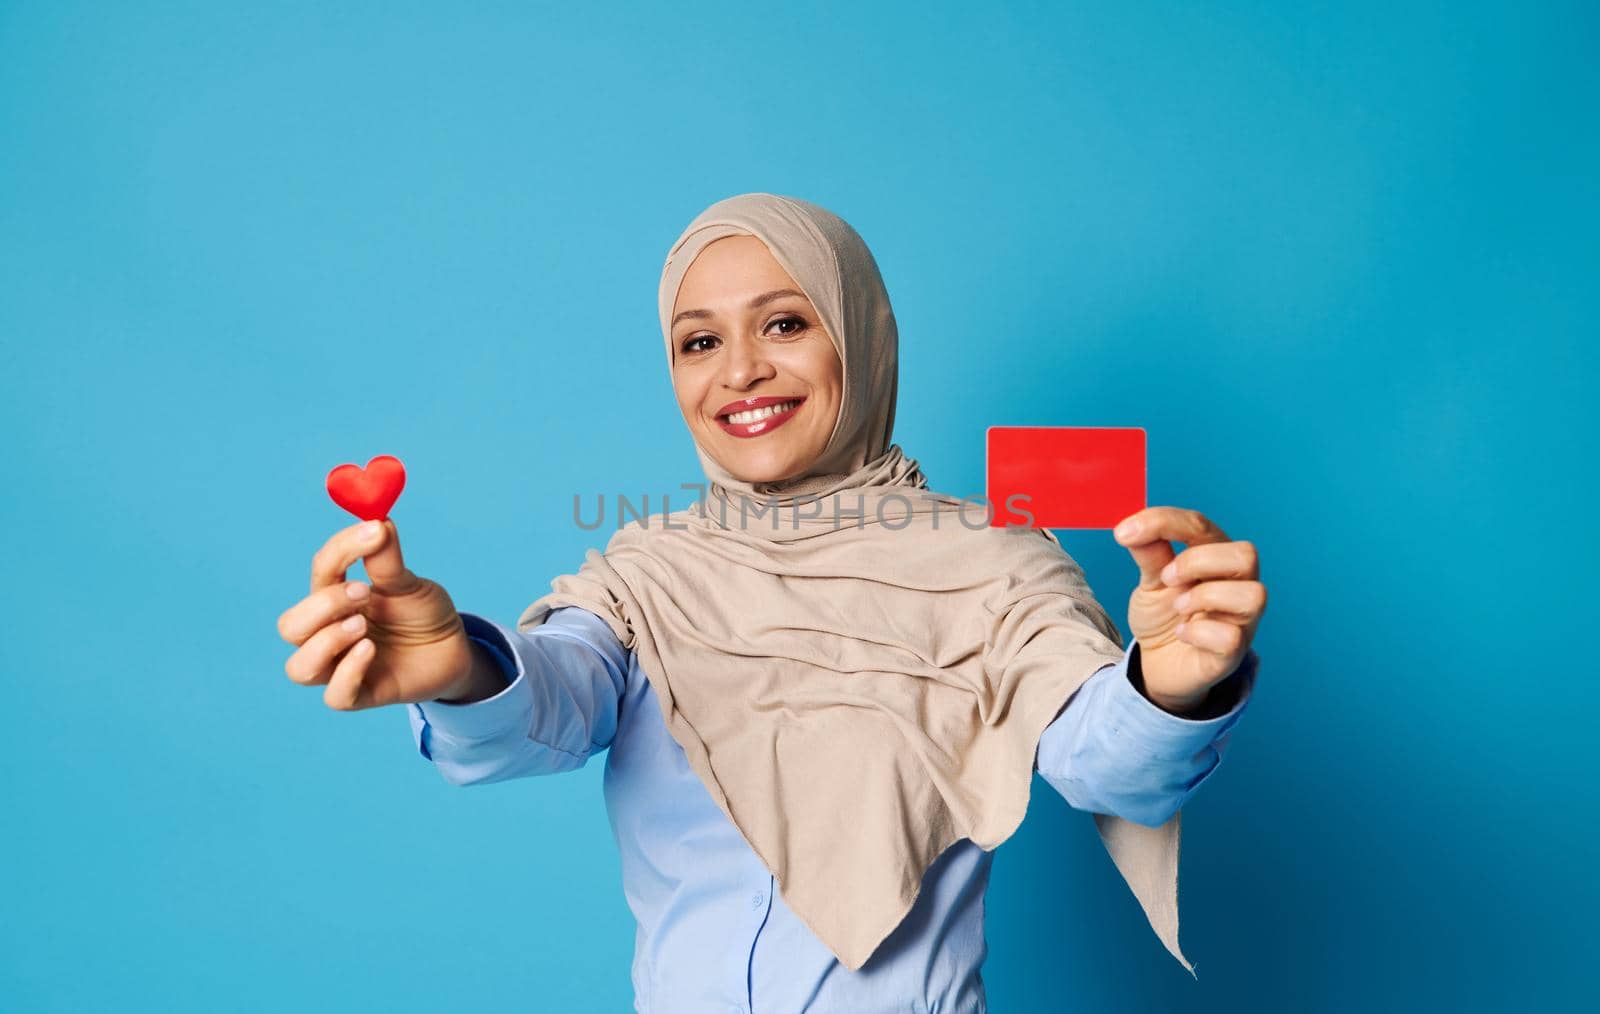 Smiling oriental woman in hijab showing a shape of red heart and blank red plastic card by artgf